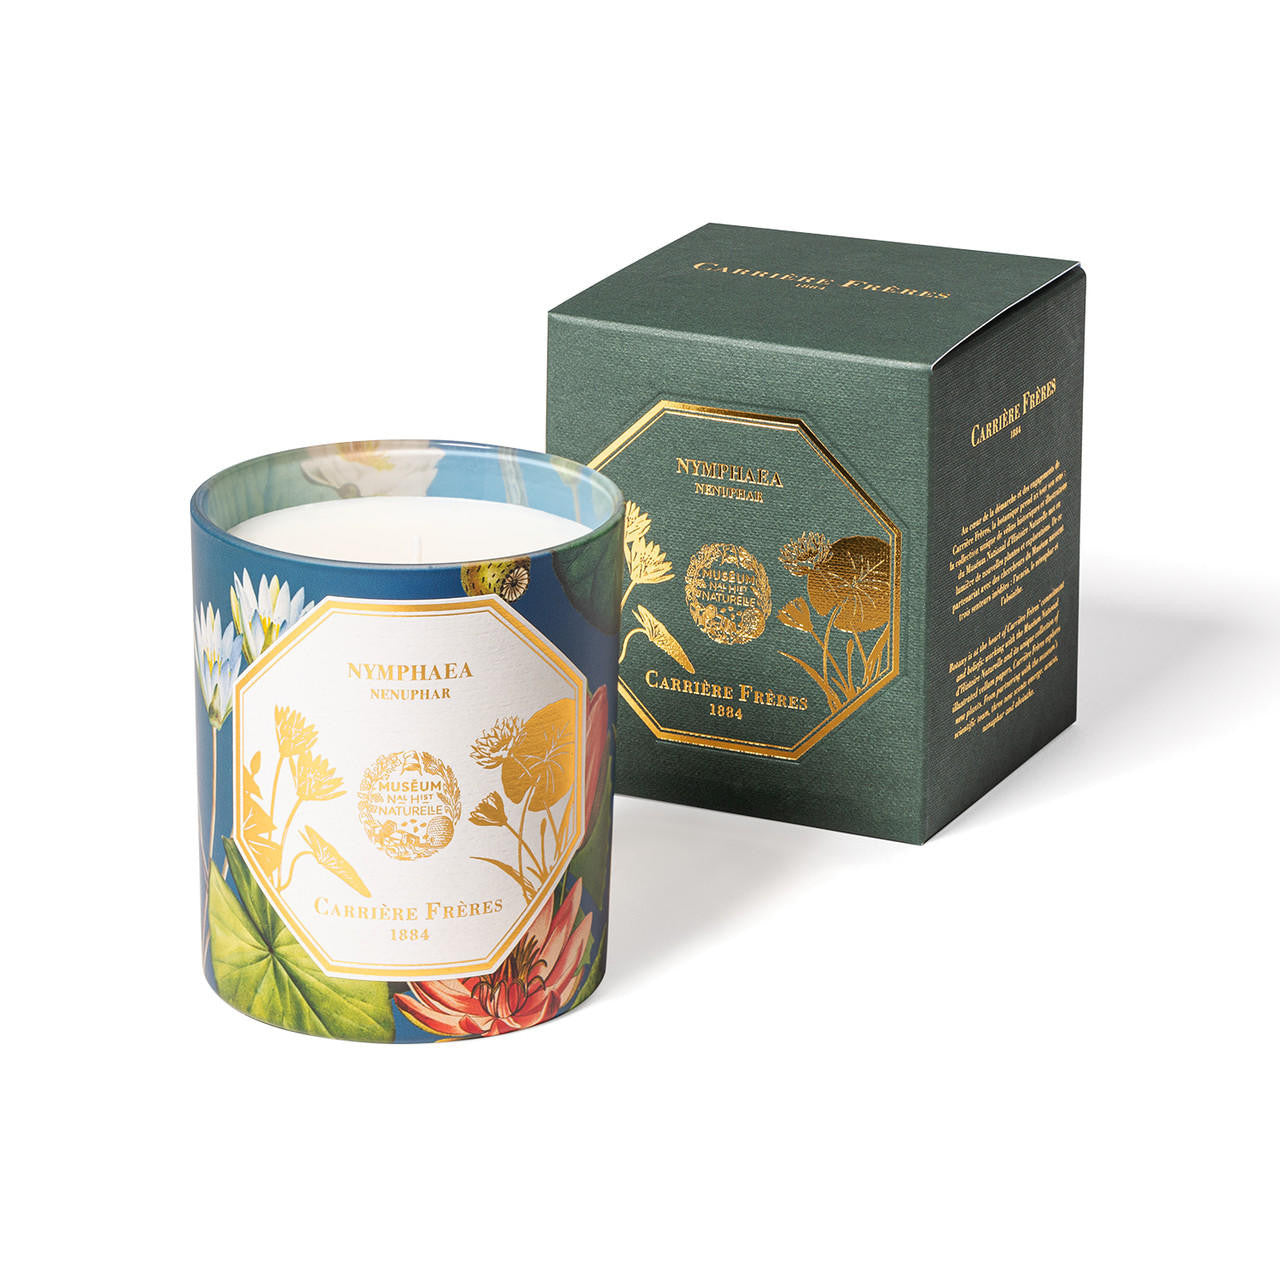  Carriere Freres - Waterlily Candle 6.5oz 